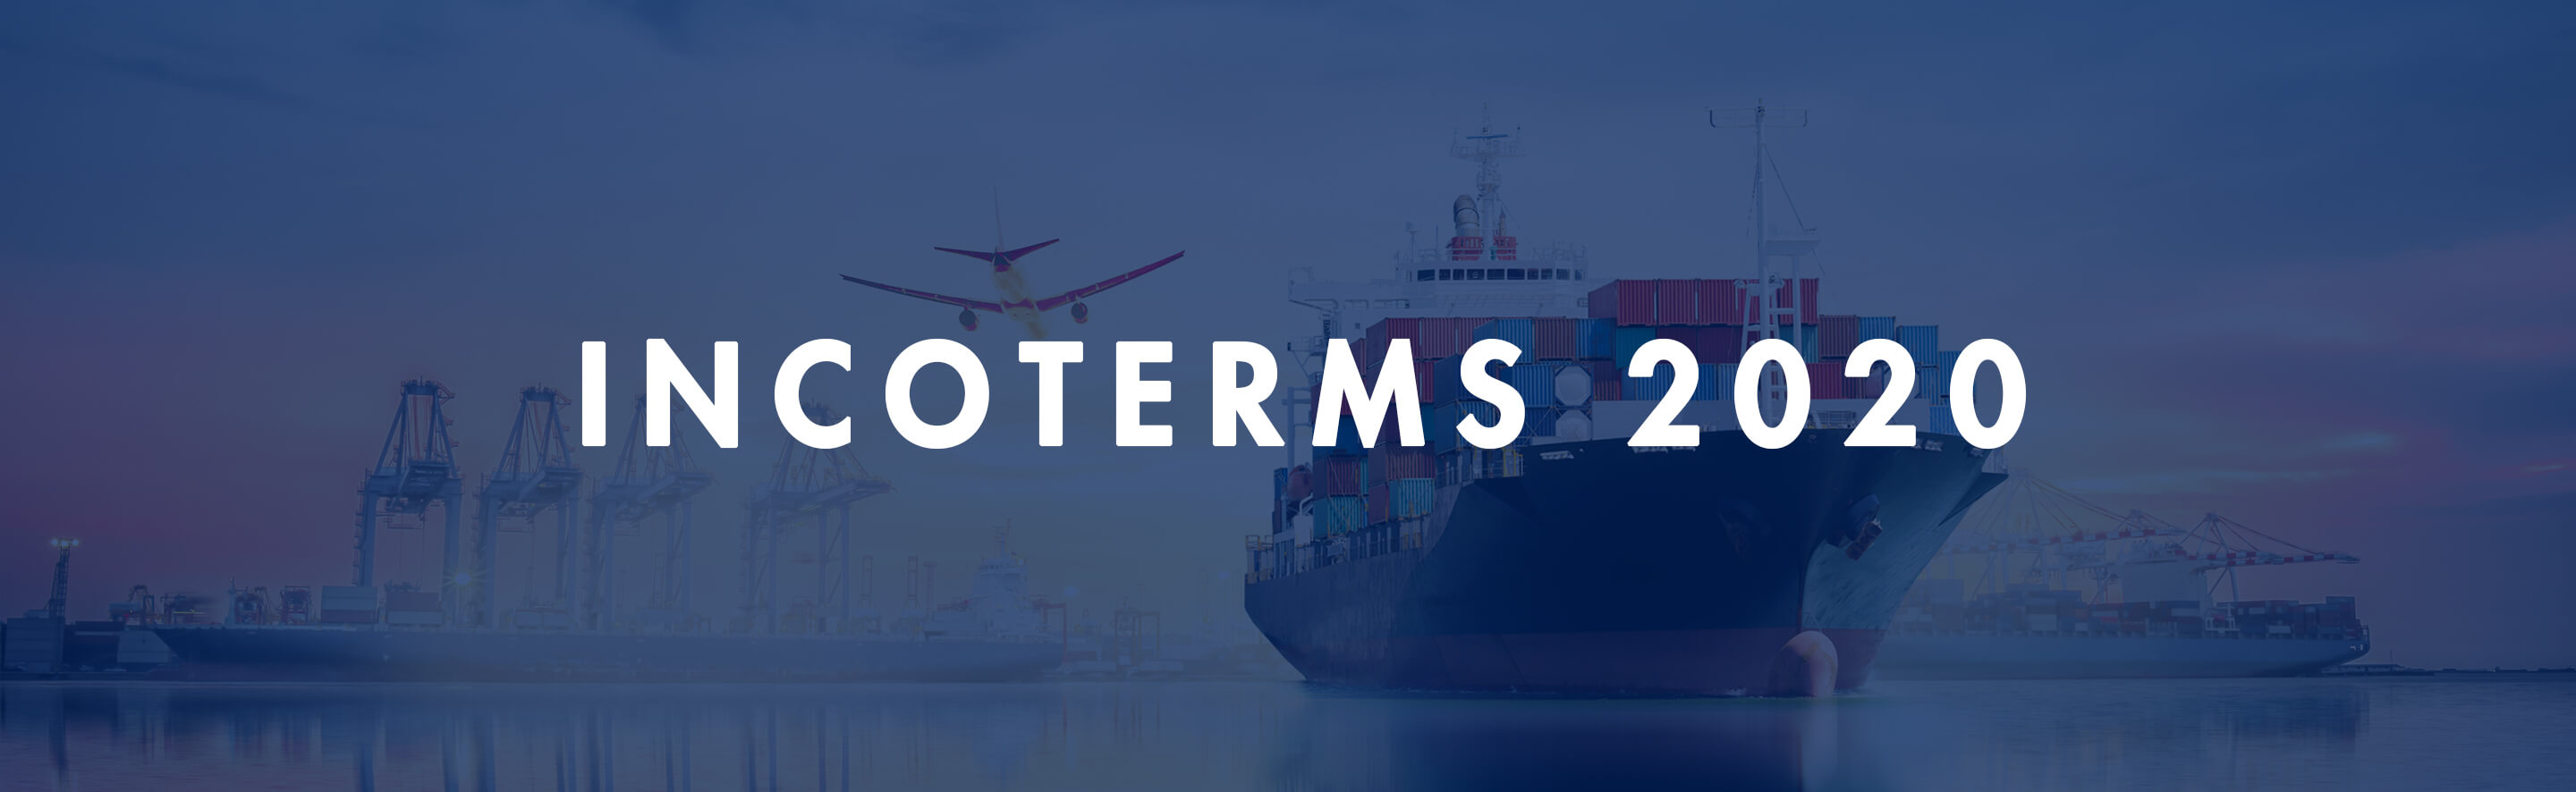 2019 12 03 incoterms 2020 small